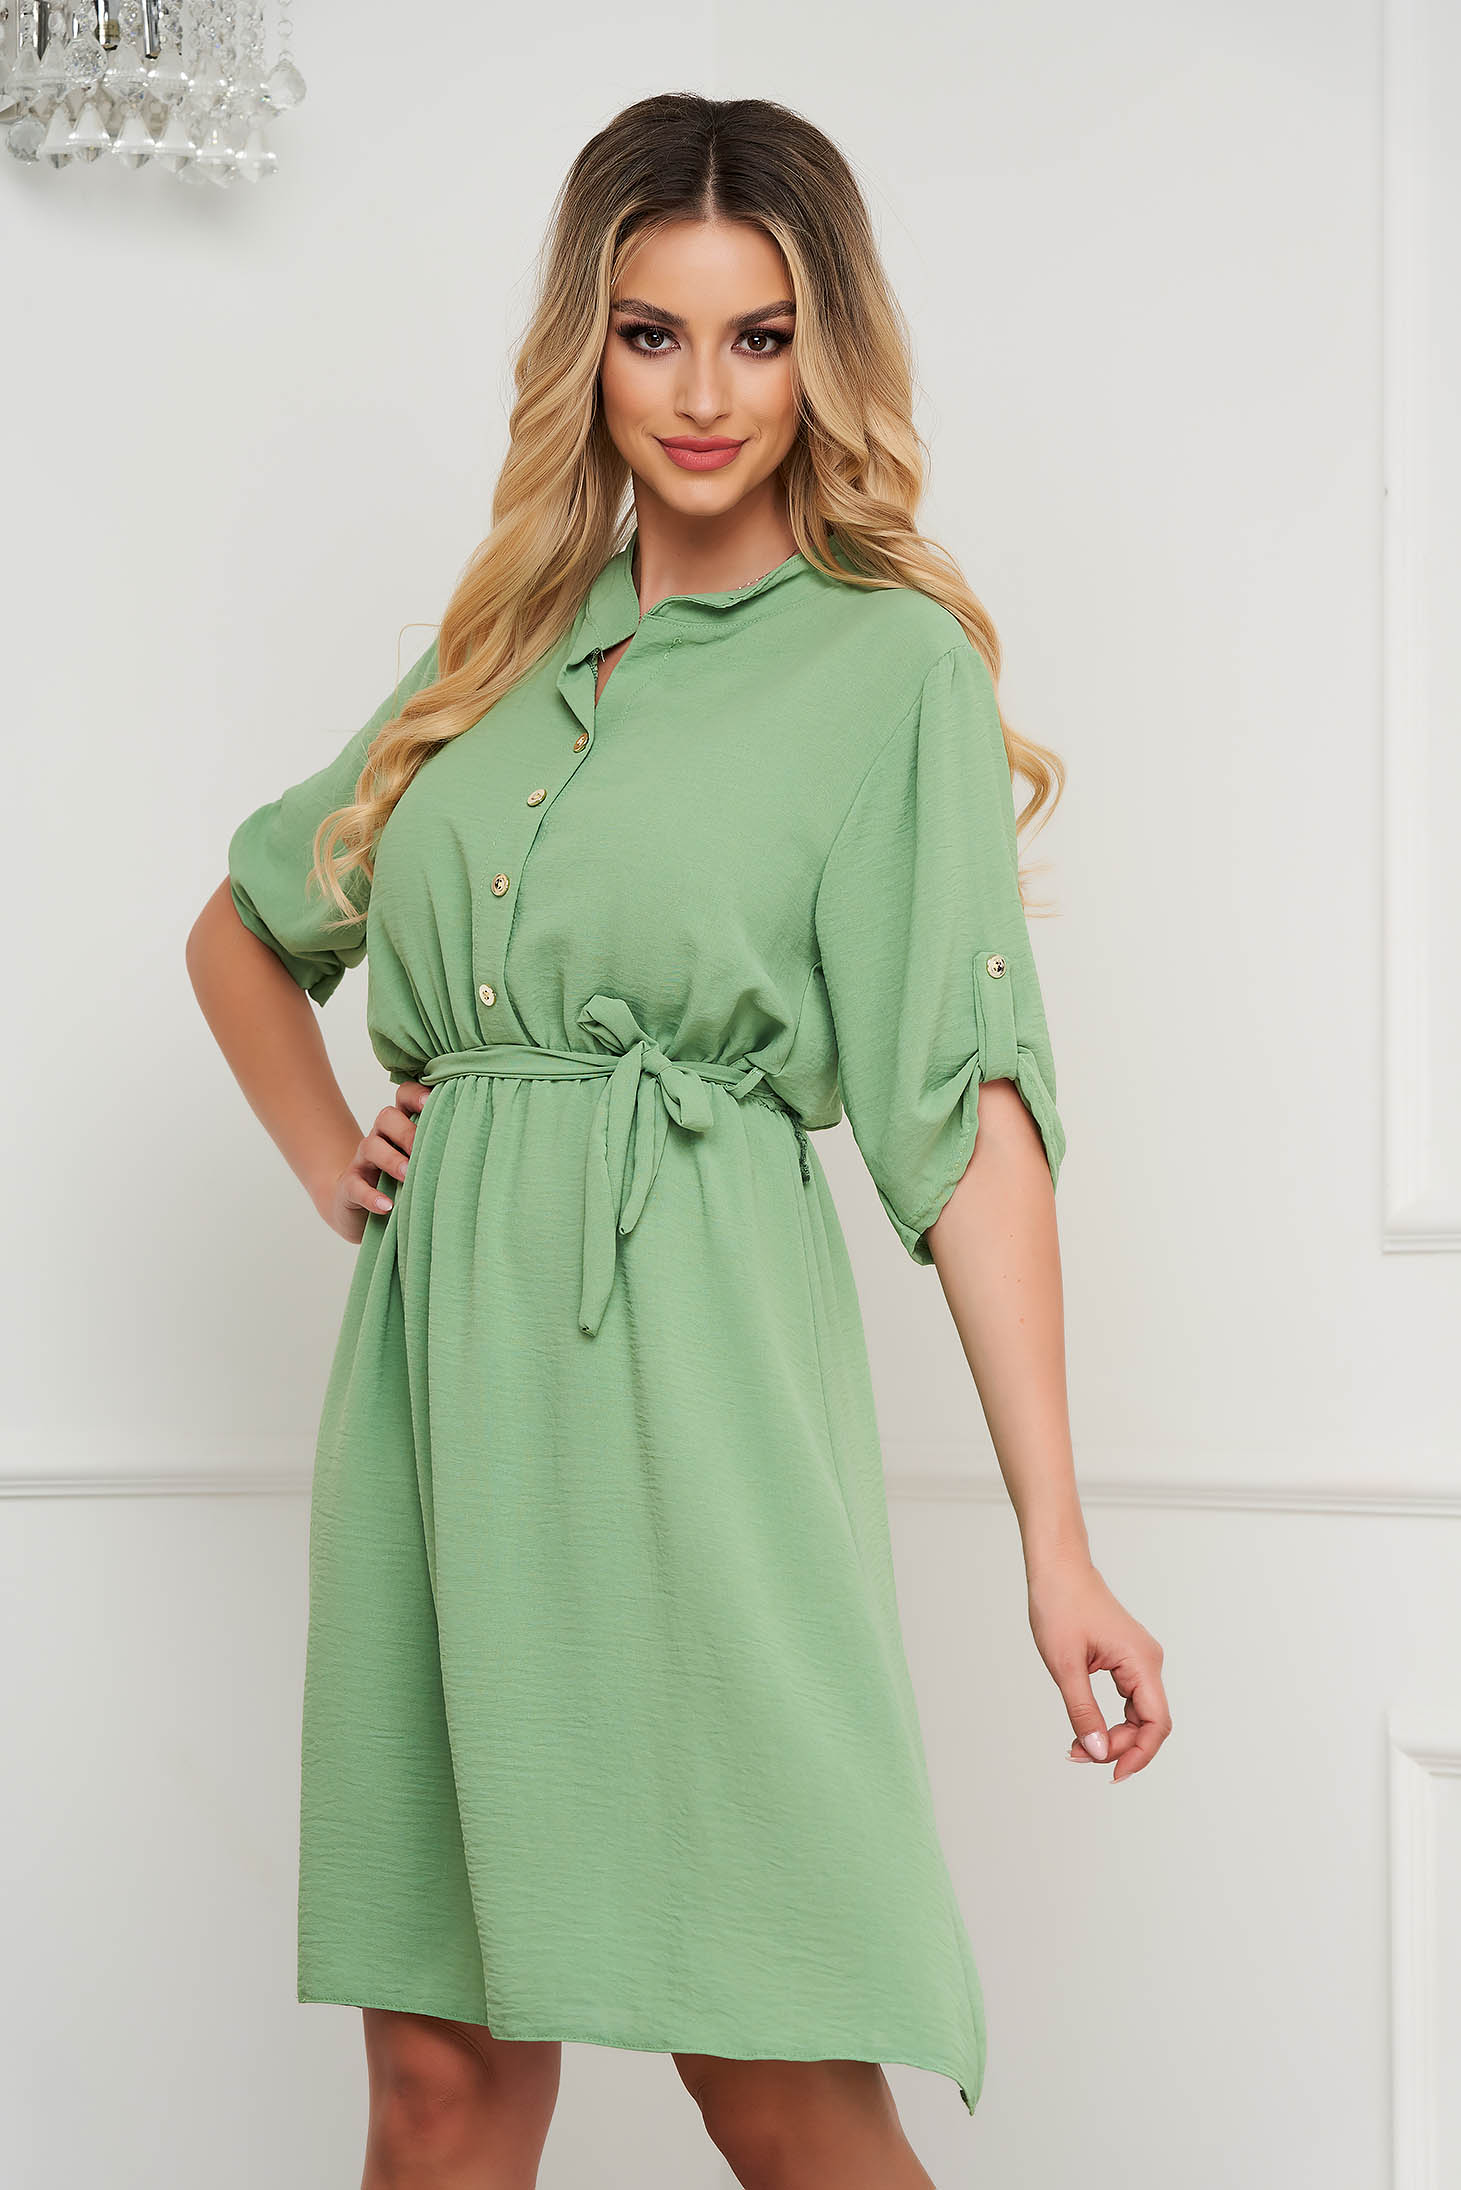 Lightgreen dress georgette short cut cloche with elastic waist accessorized with tied waistband